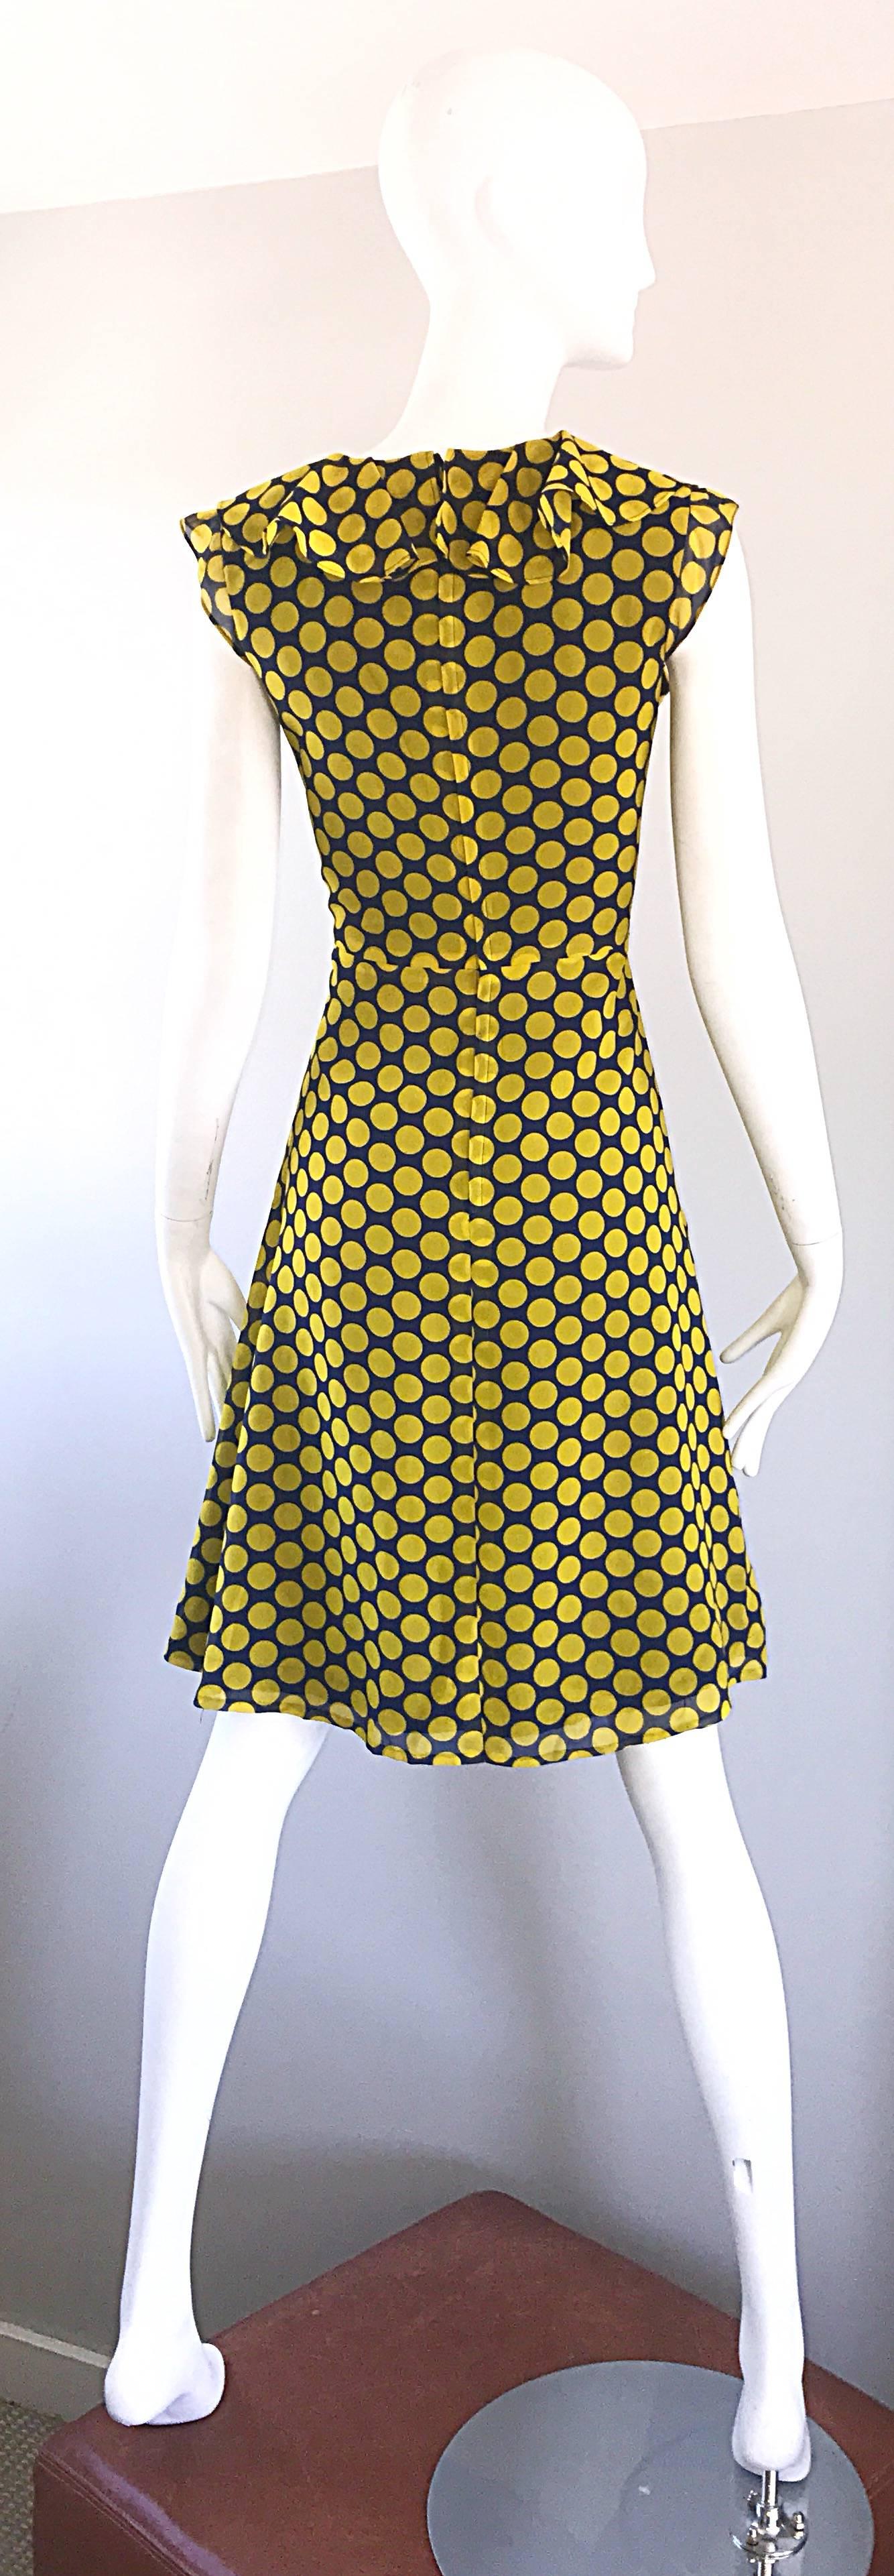 Chic 1970s Yellow and Navy Blue Polka Dot Chiffon A - Line Vintage 70s Day Dress In Excellent Condition For Sale In San Diego, CA